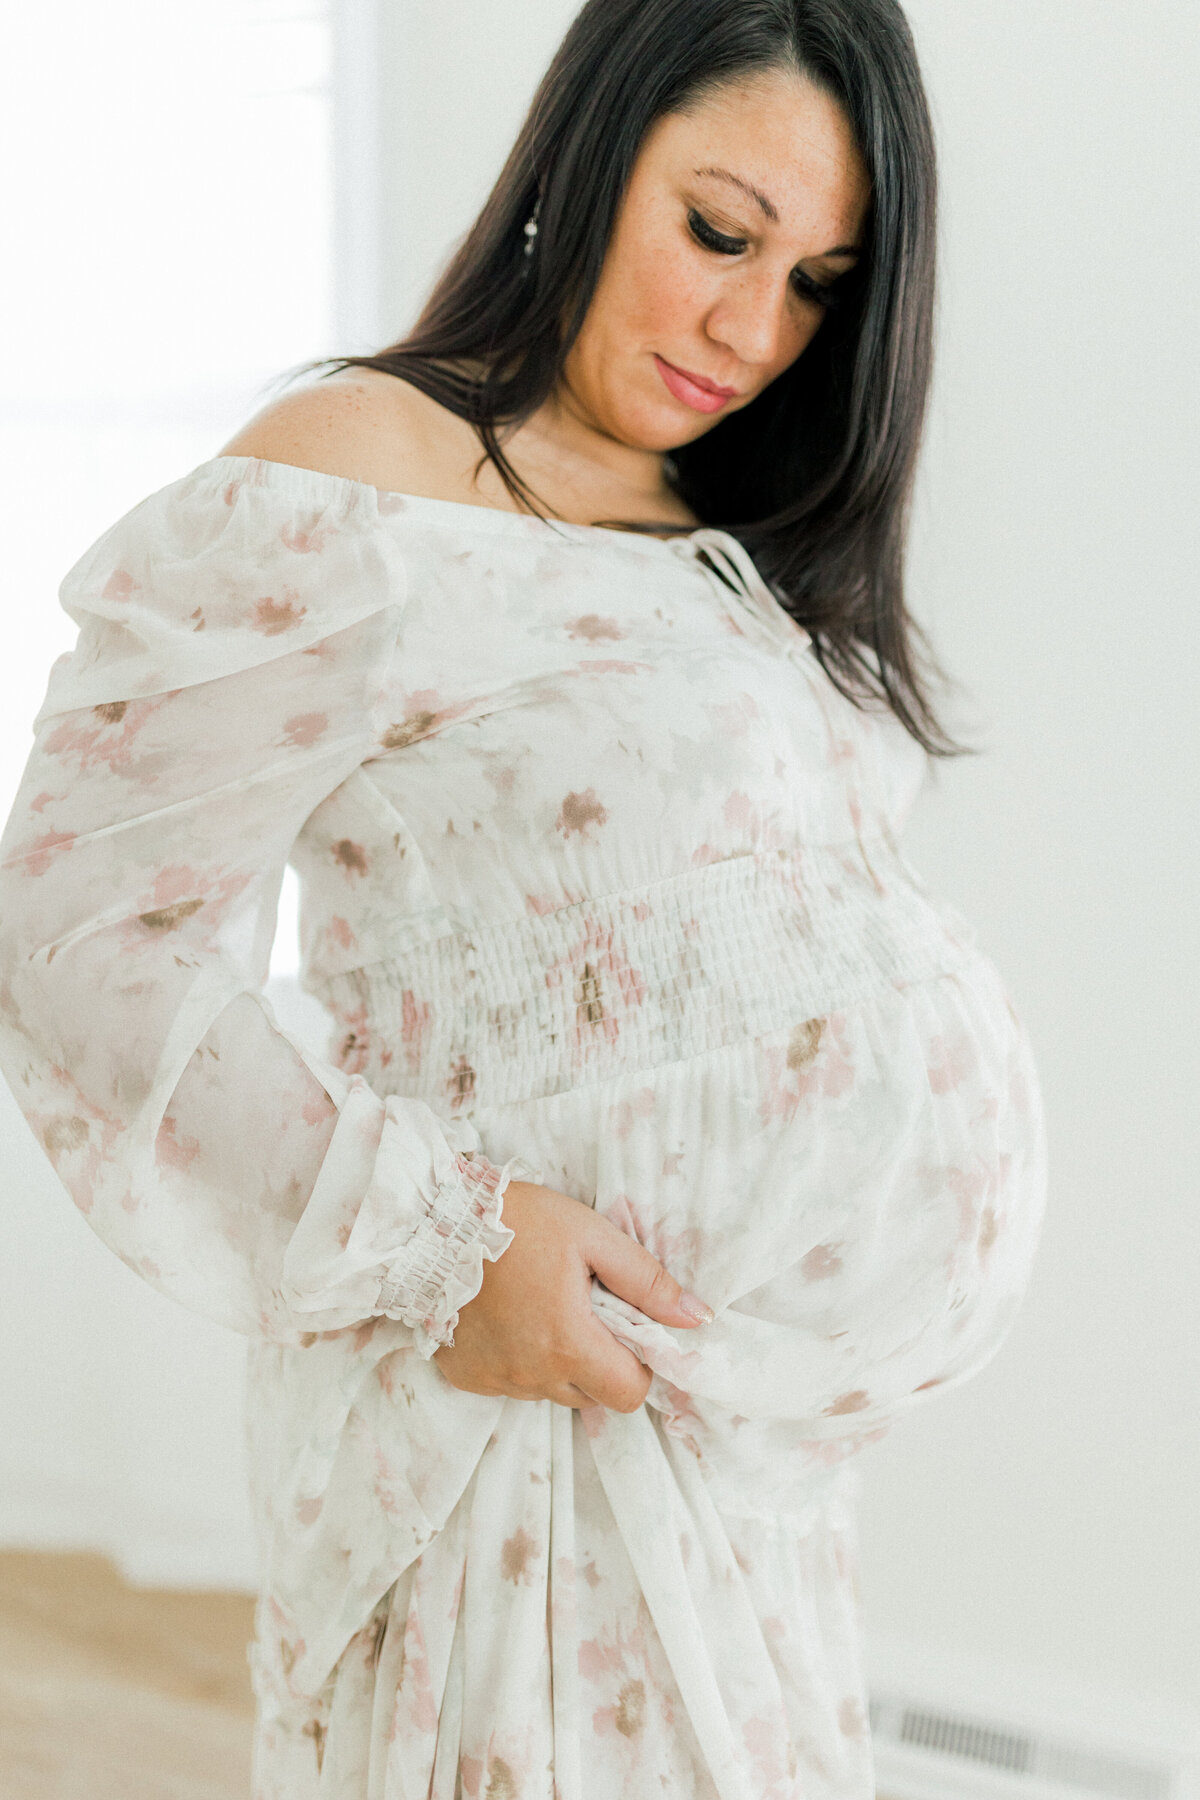 Shannon Young- Maternity Session- Tara Federico Photography-38